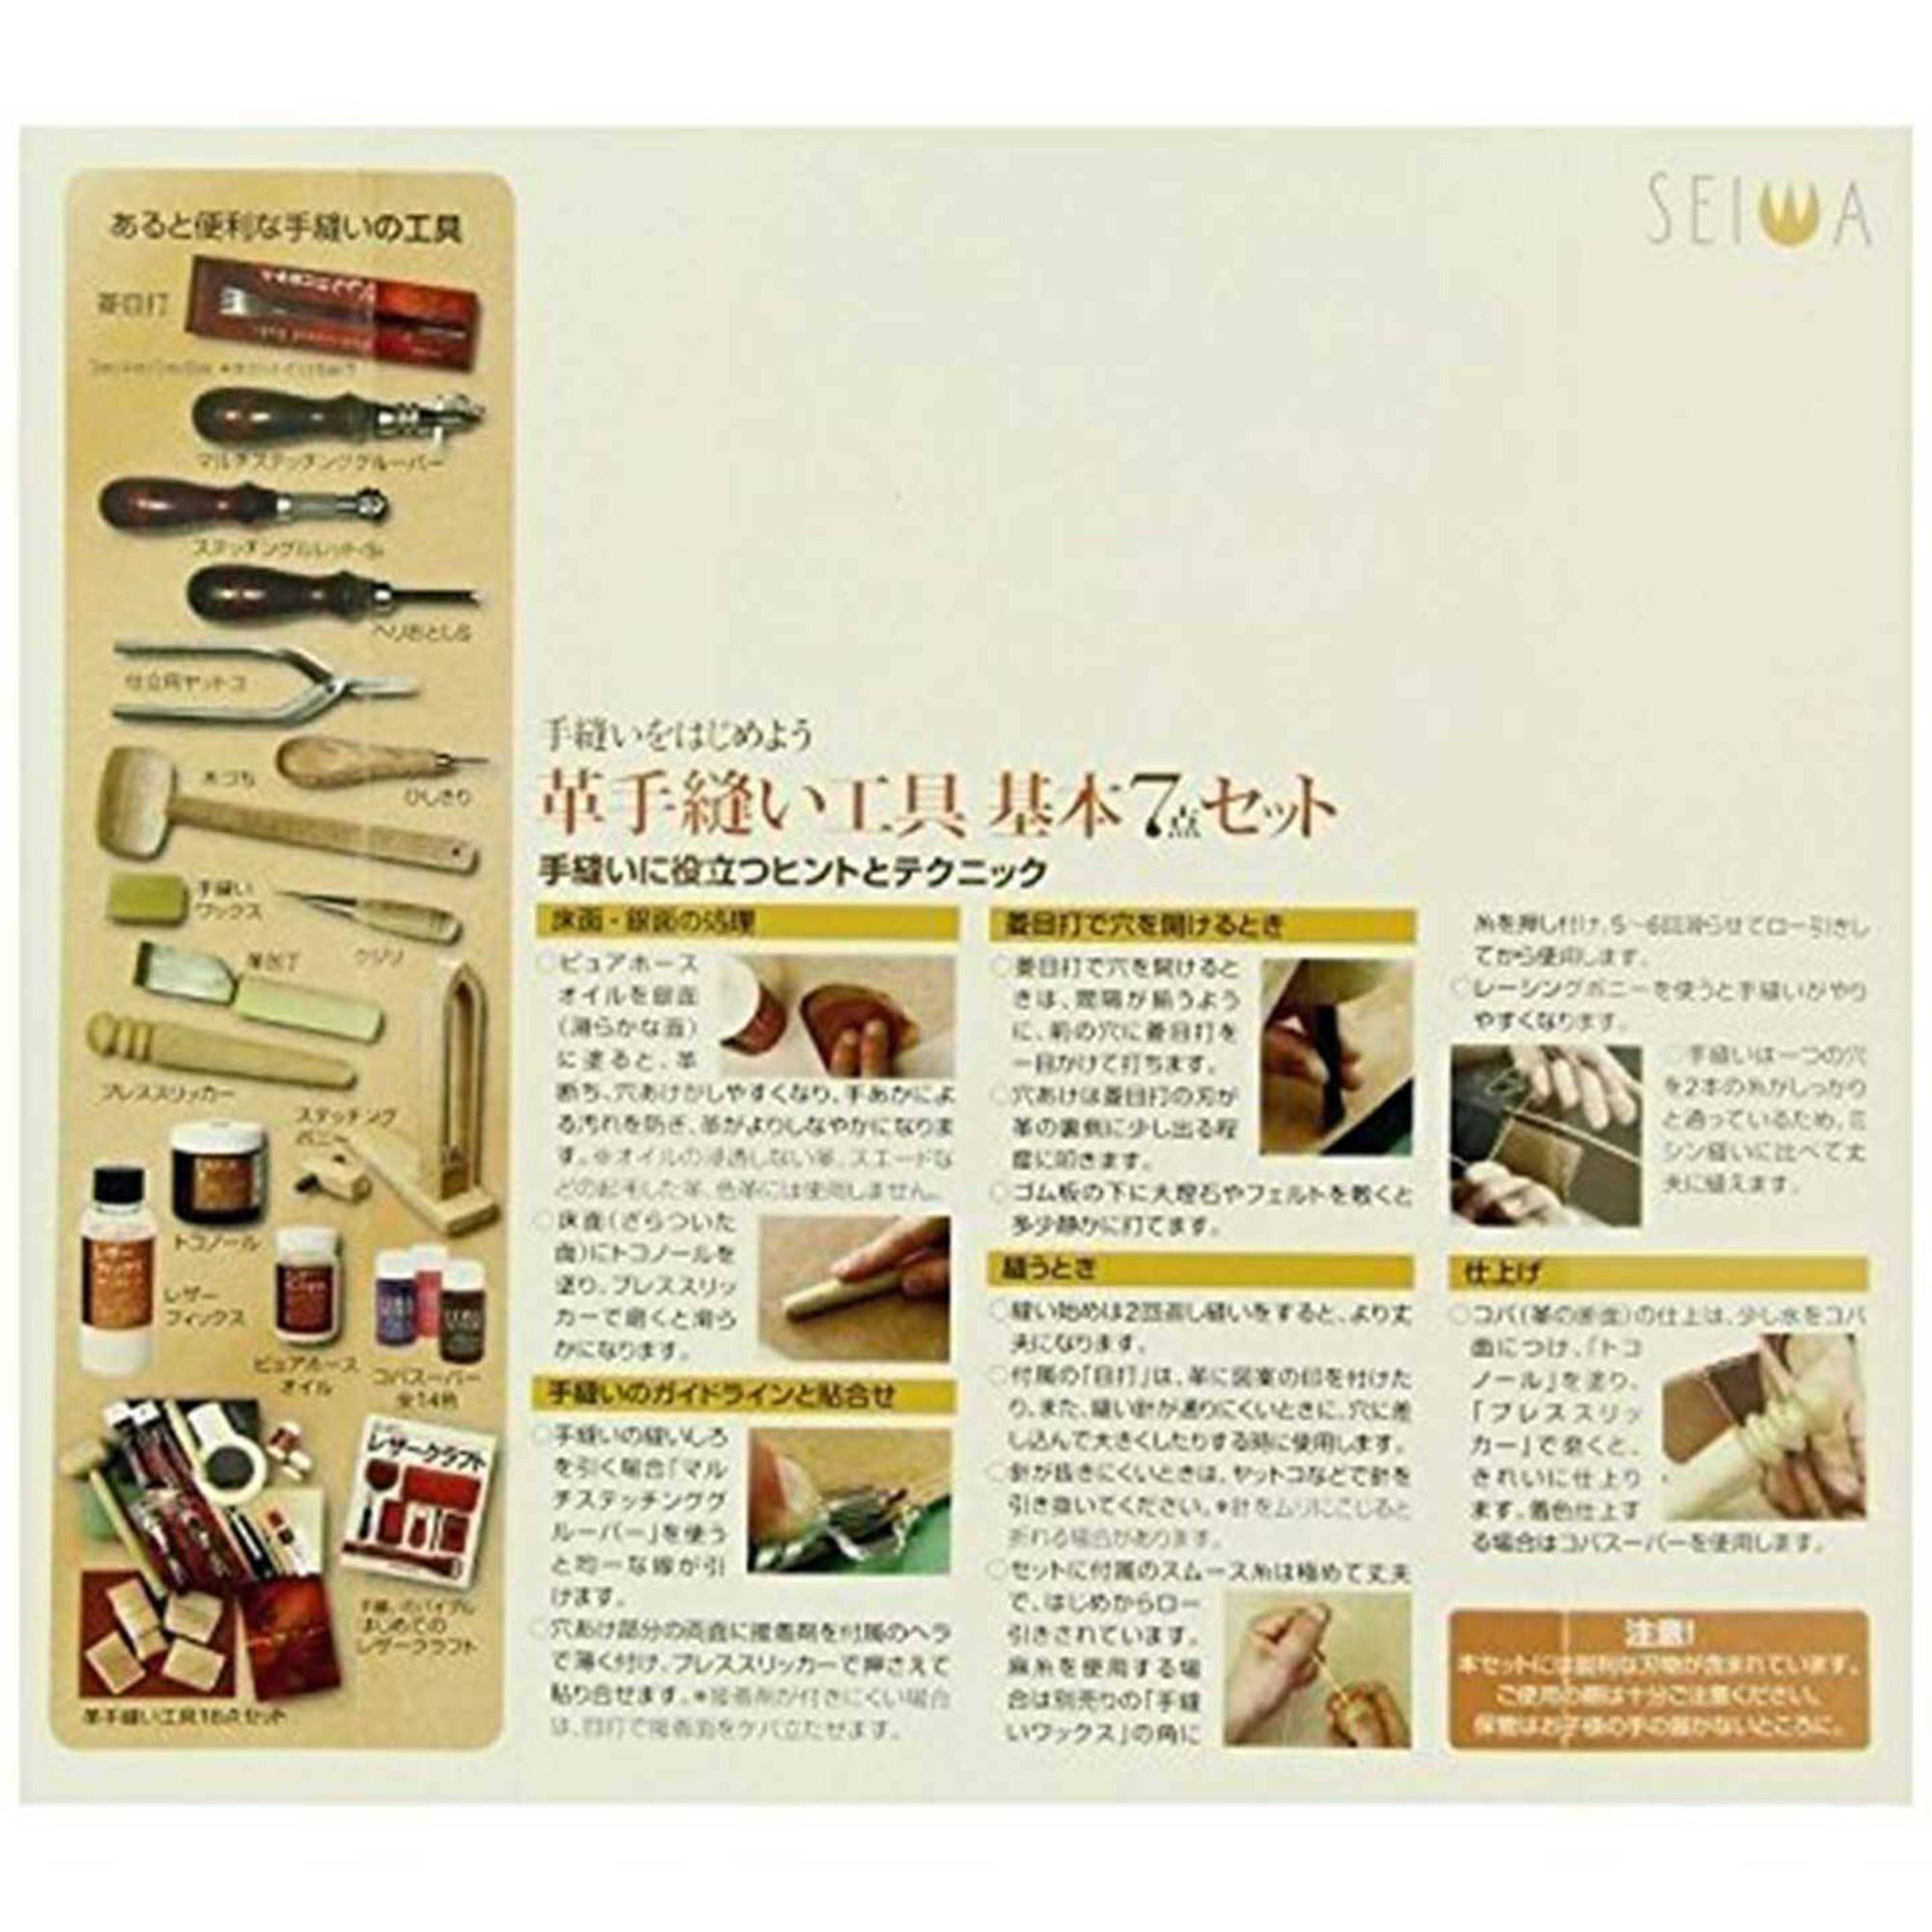 Seiwa Leathercraft Professional Hand Sewing Kit Pricking Iron Awl Thread and Needle Stitching Supplies Set， for Leather Working